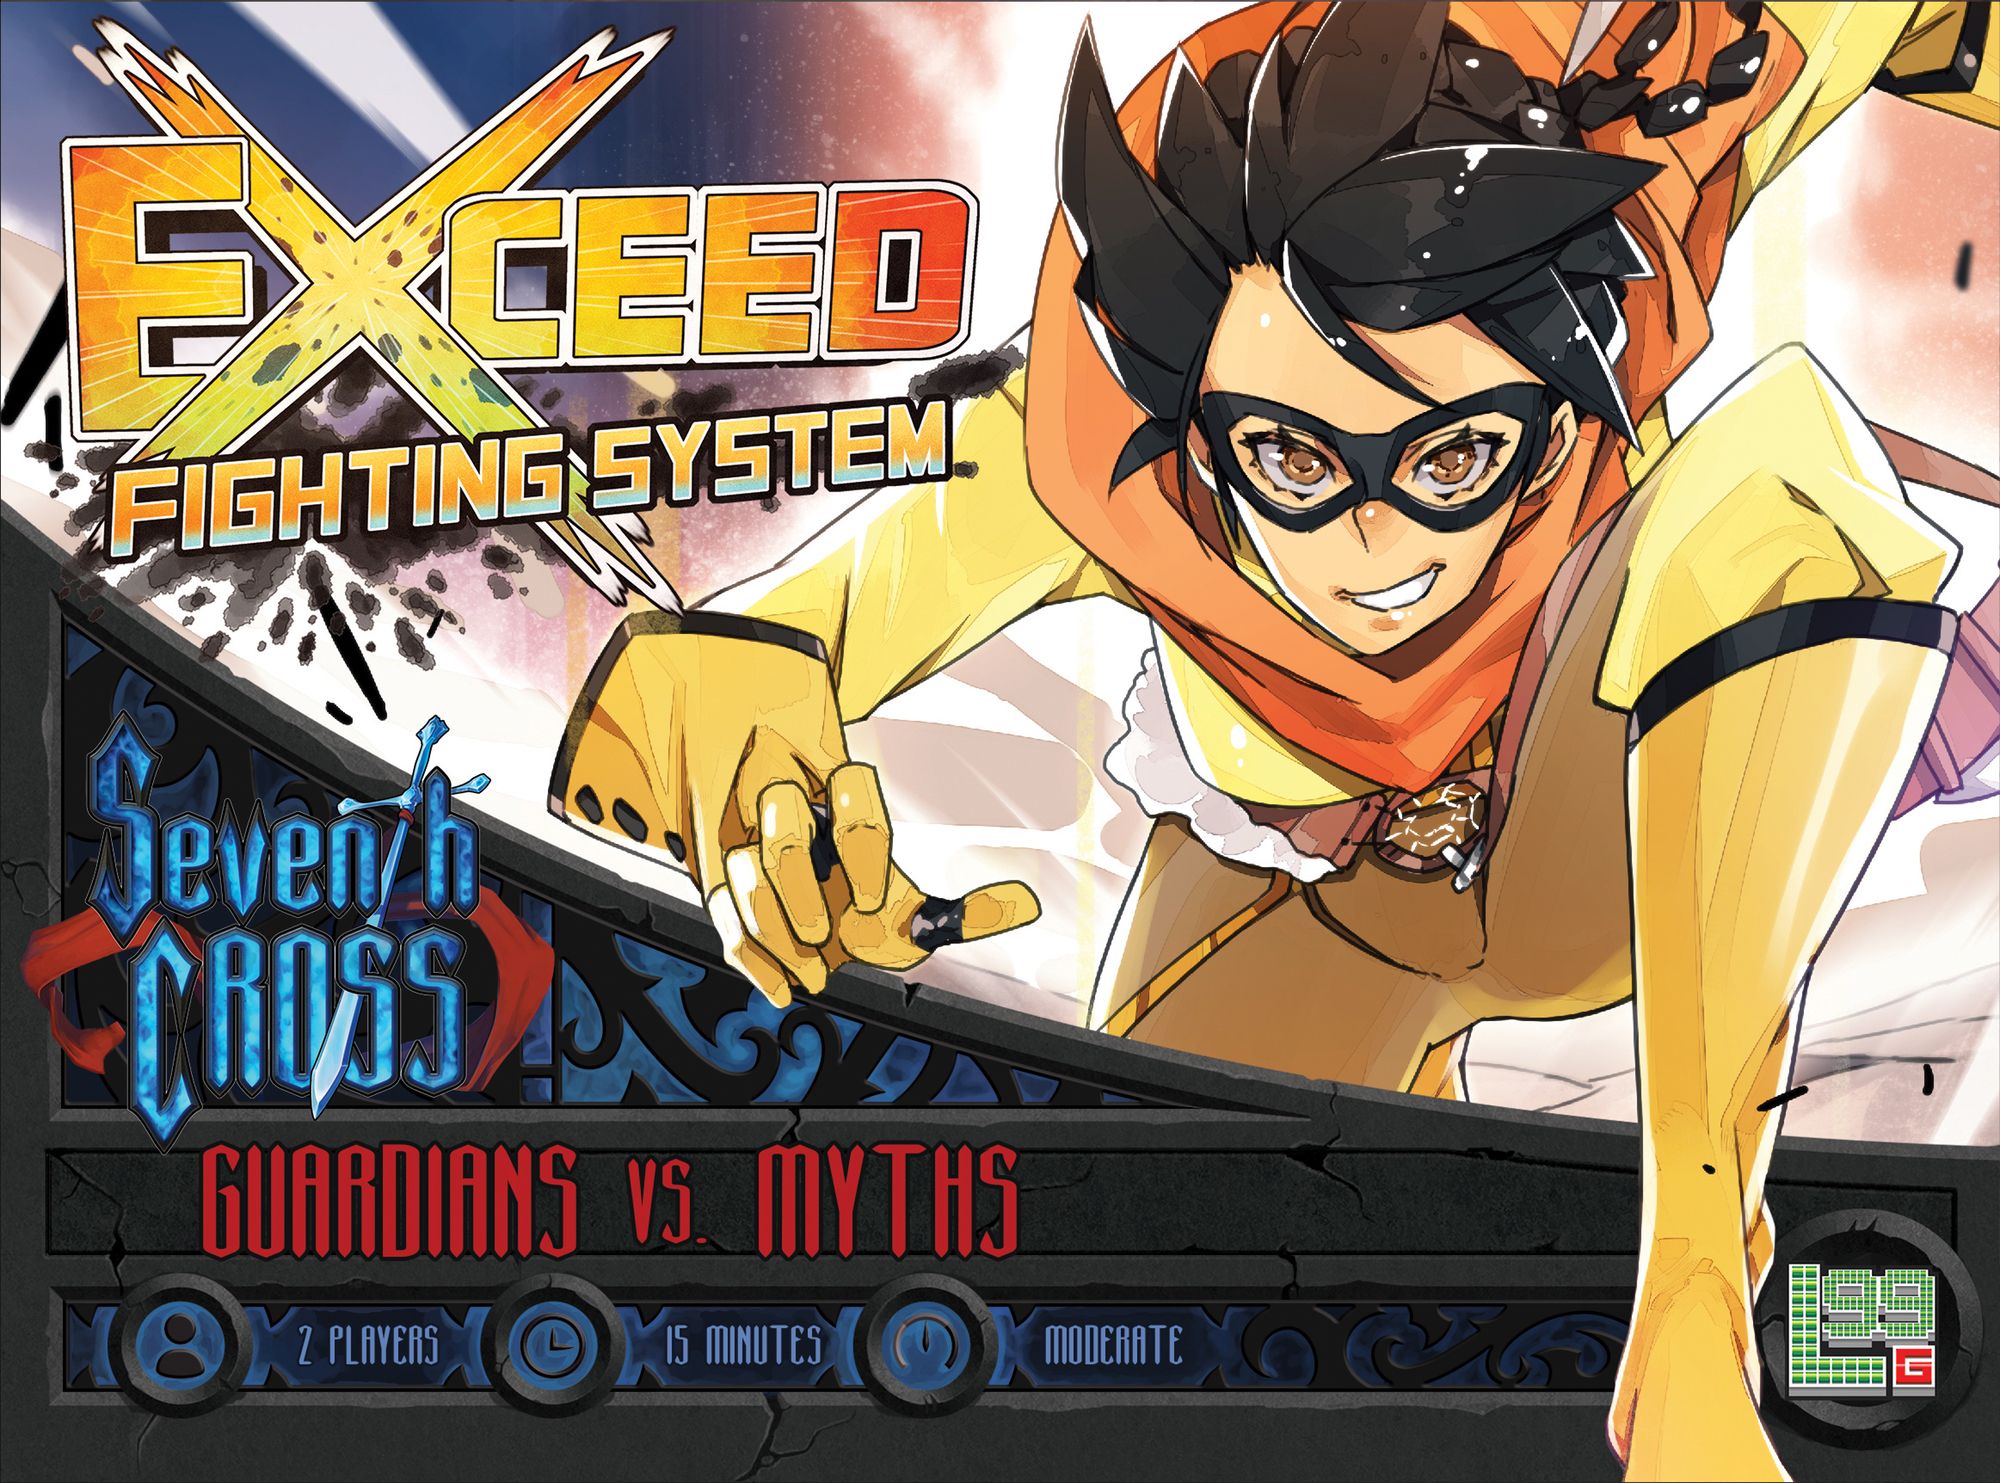 Exceed: Seventh Cross – Guardians vs. Myths Box